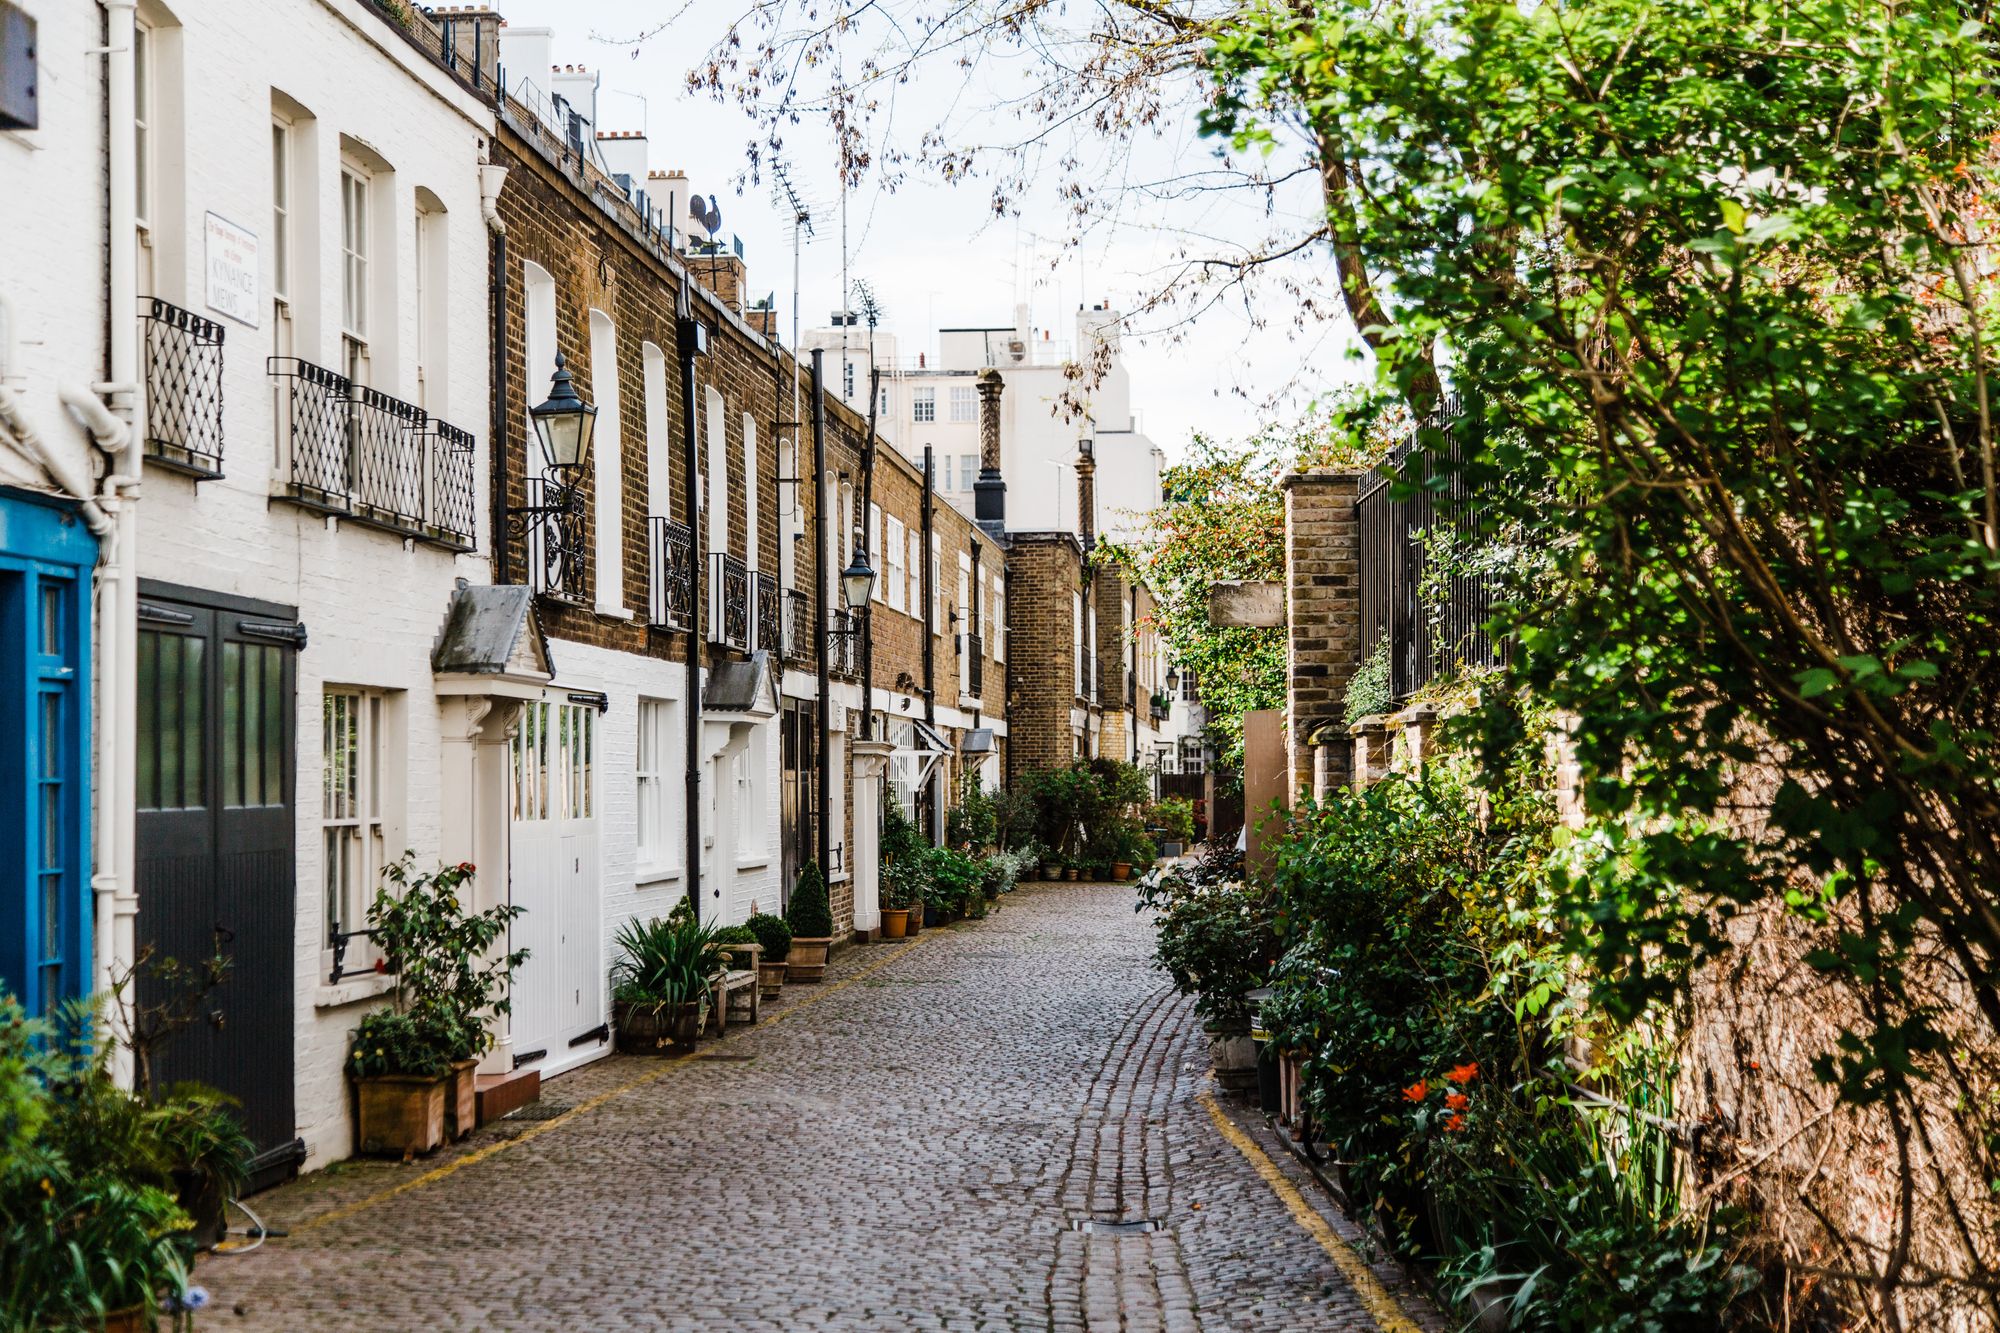 The UK Rental Market 2021: 5 projections for the new year